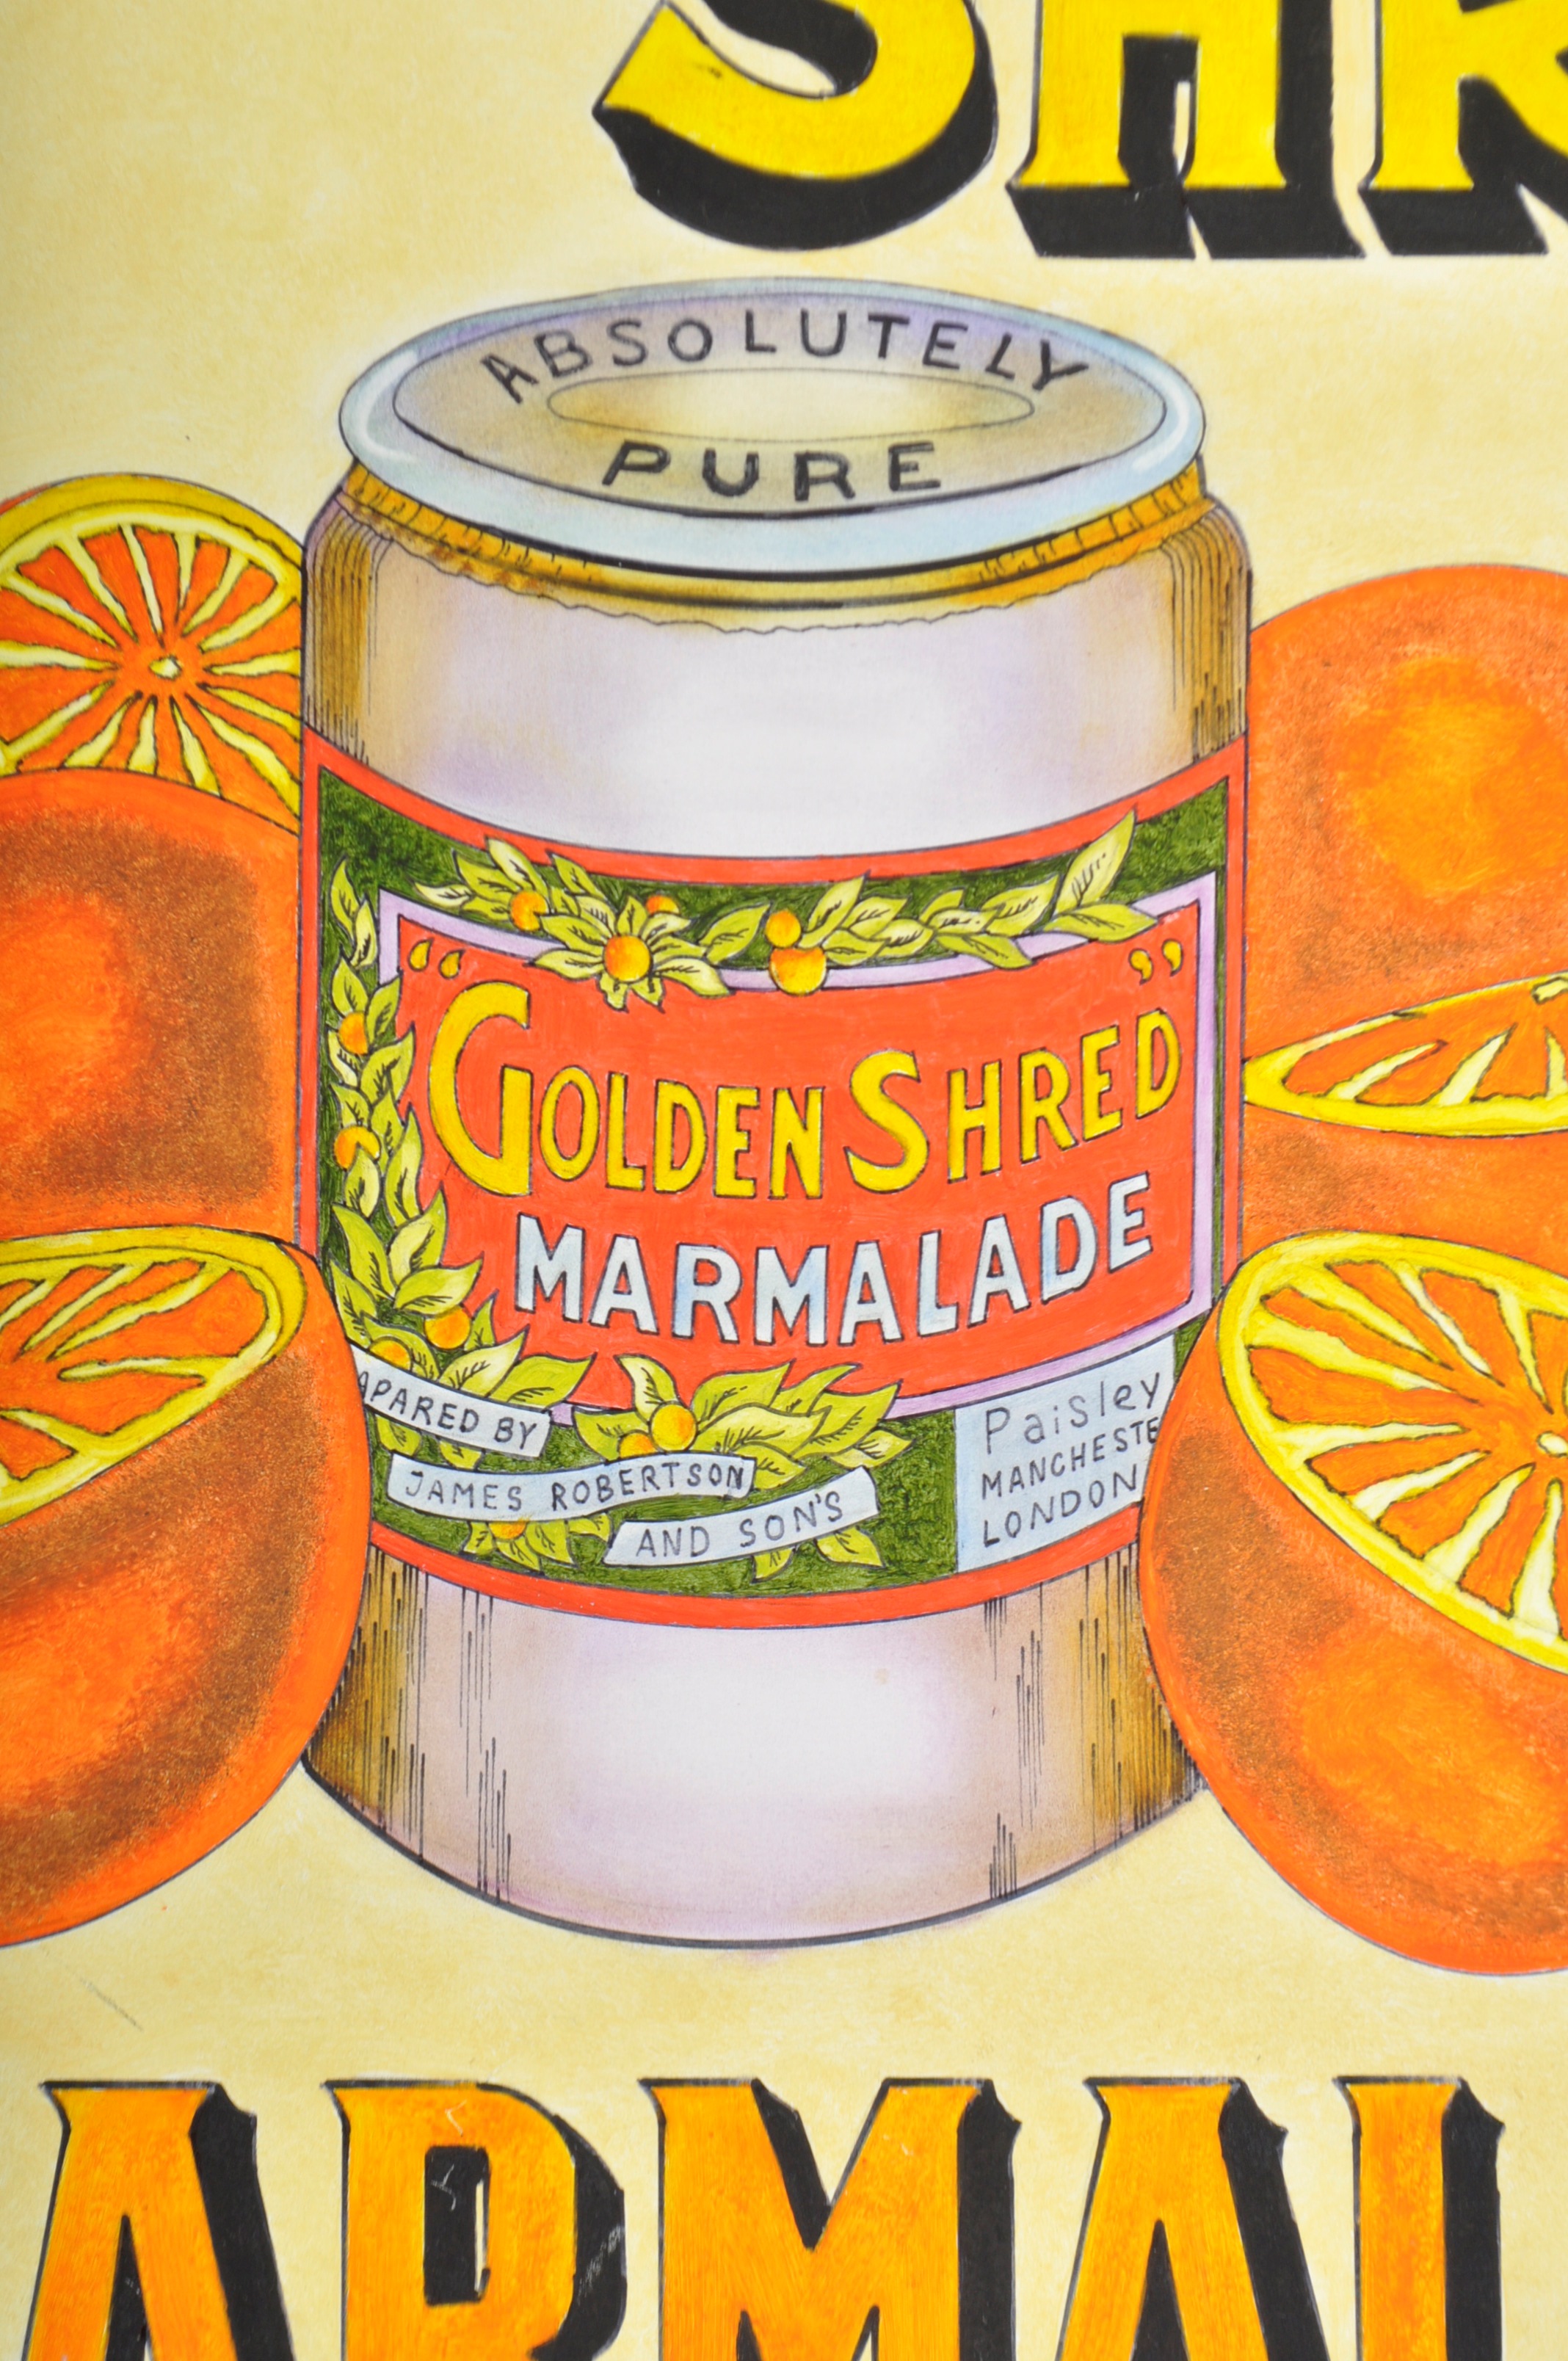 GOLDEN SHRED MARMALADE - LARGE OIL ON BOARD ADVERTISING SIGN - Image 3 of 7